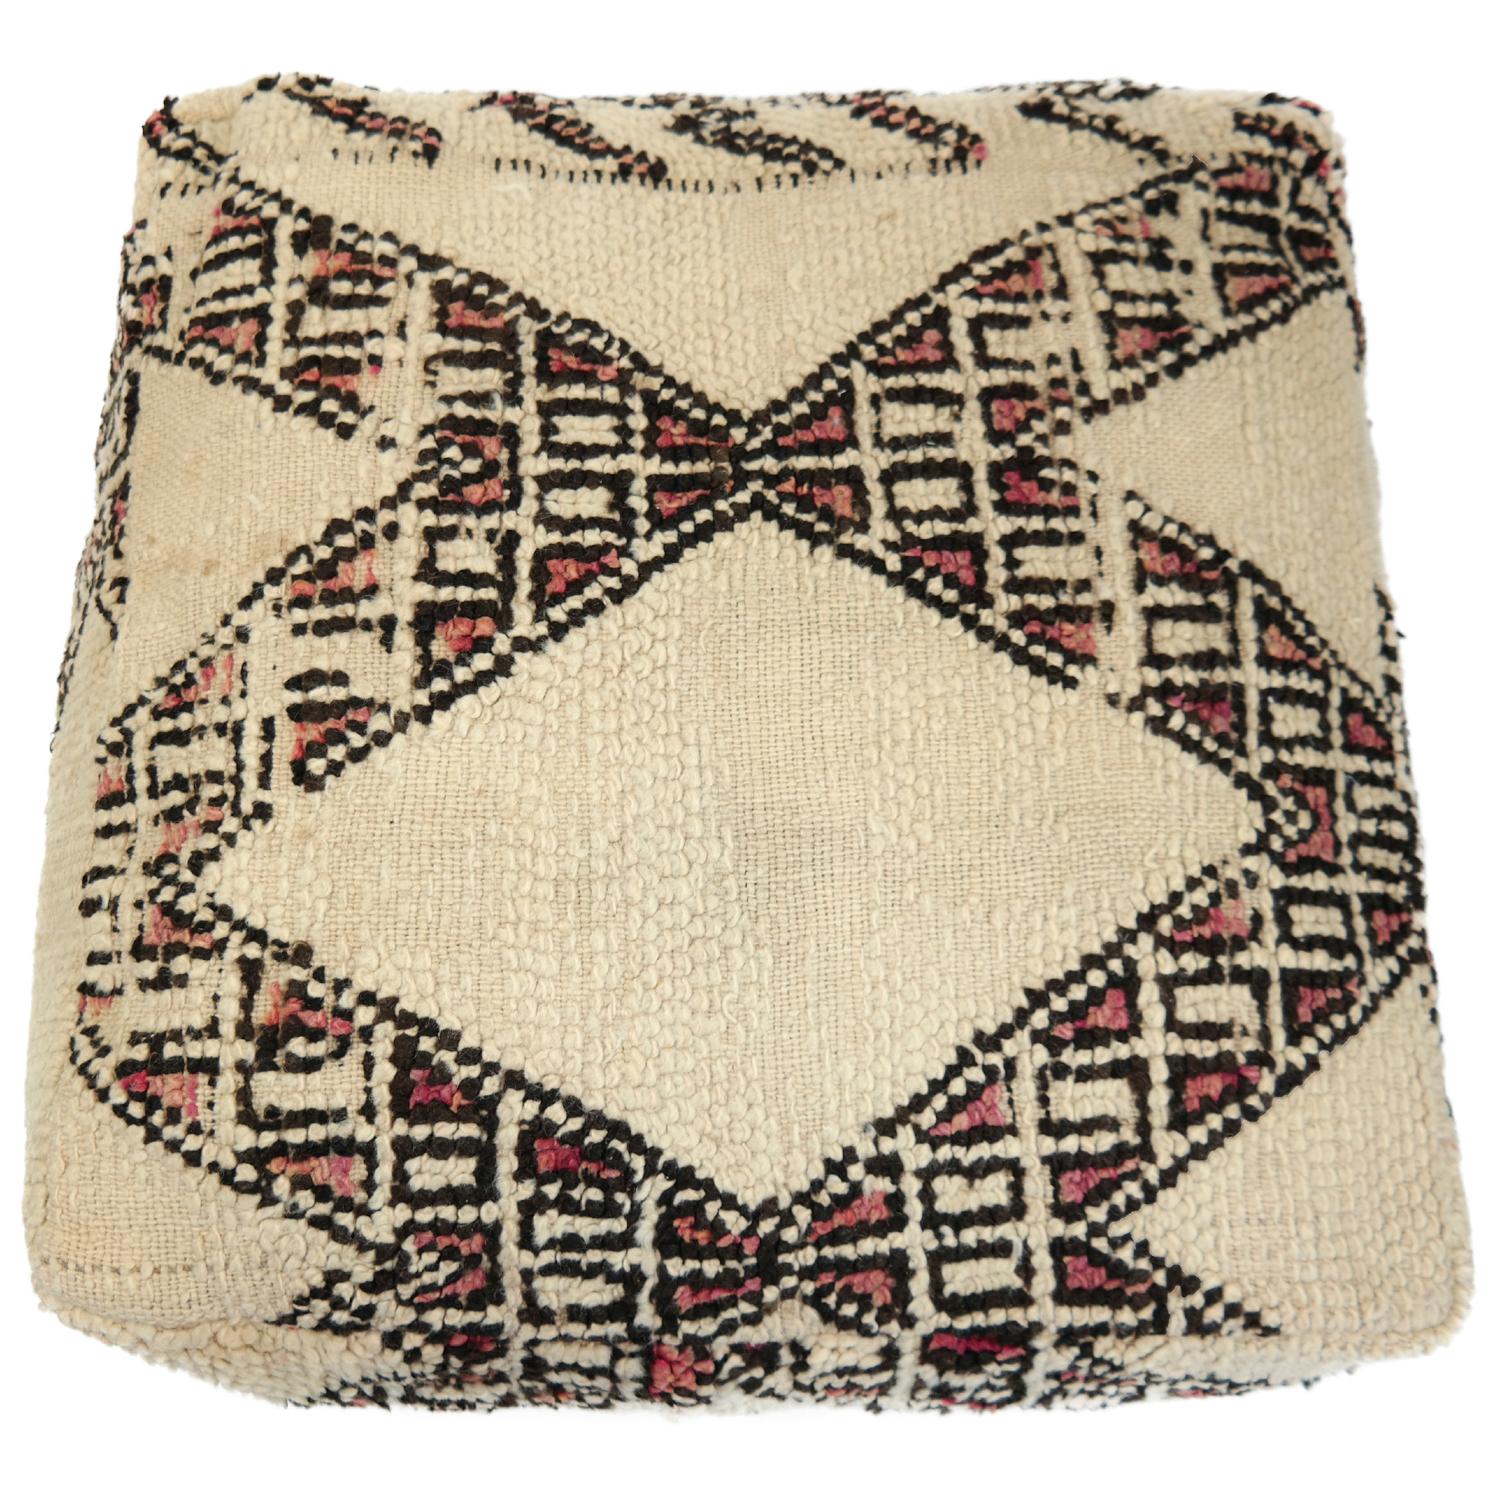 Beni Ourain pouf

Make your space completely unique with this gorgeous custom designed Moroccan Beni Ourain pouf.

This Moroccan pouf is made from a beautiful authentic vintage Beni Ourain rug. The old rugs are beautiful because of their life